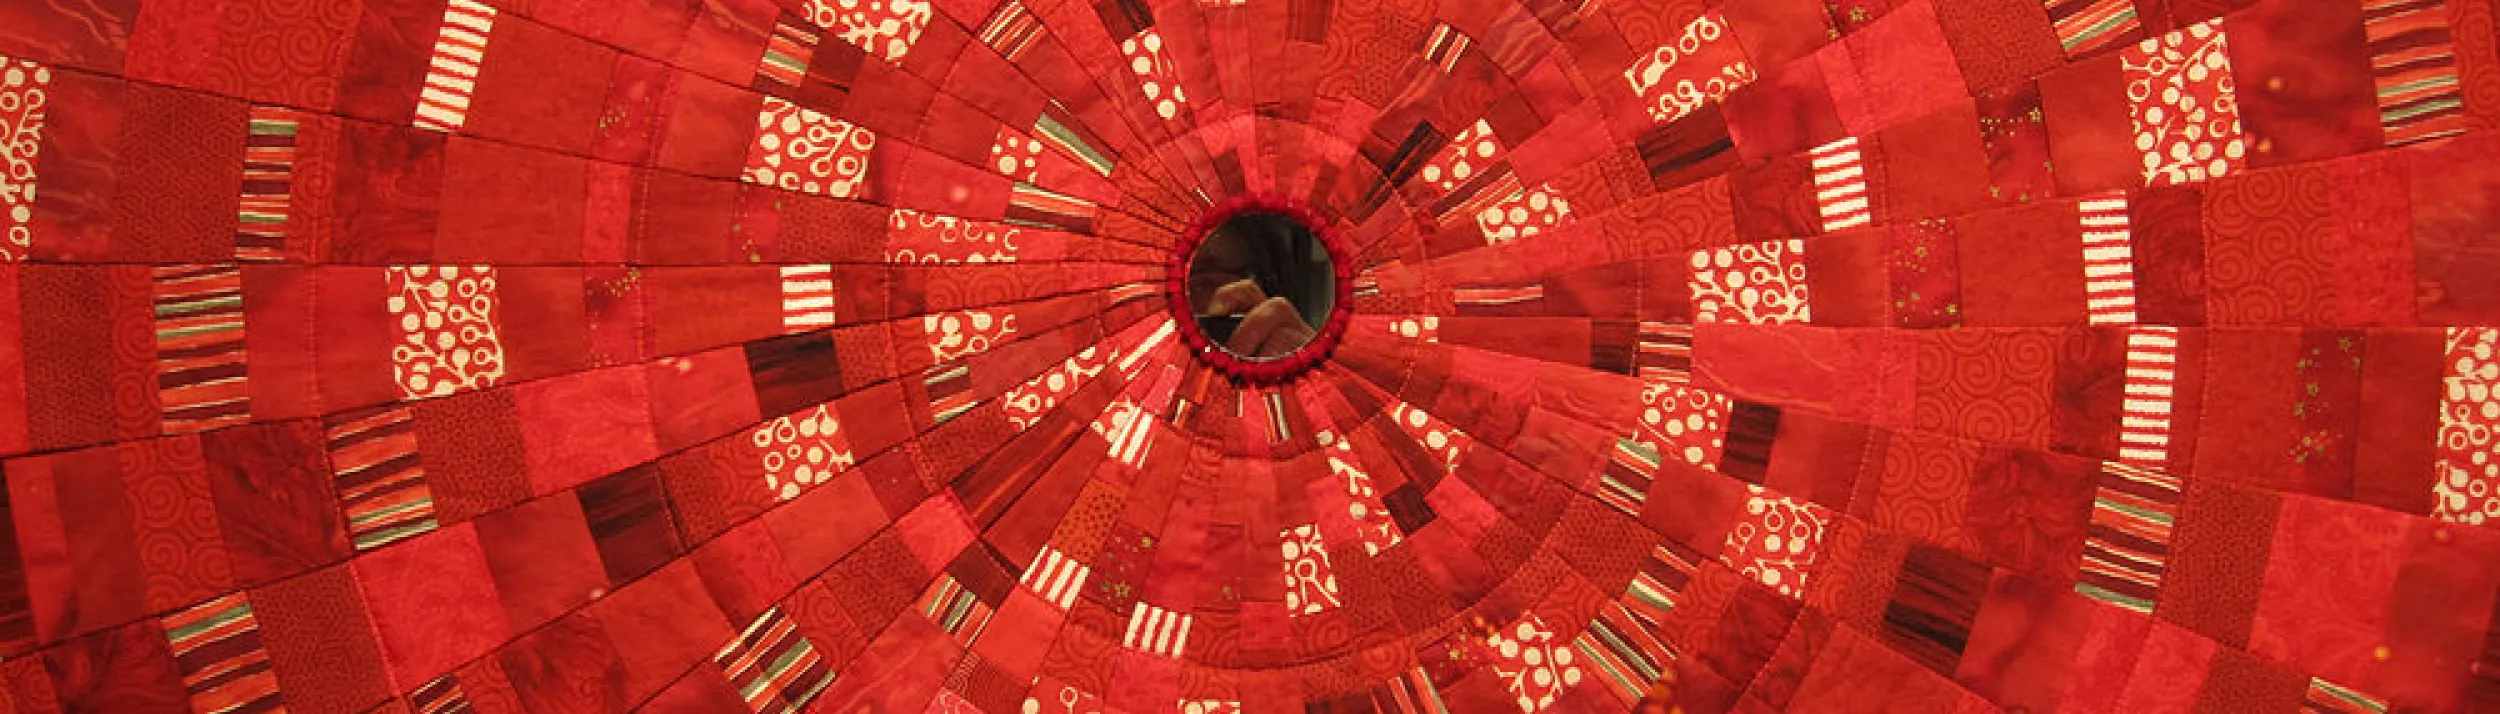 Closeup of red fabric with a circular pattern